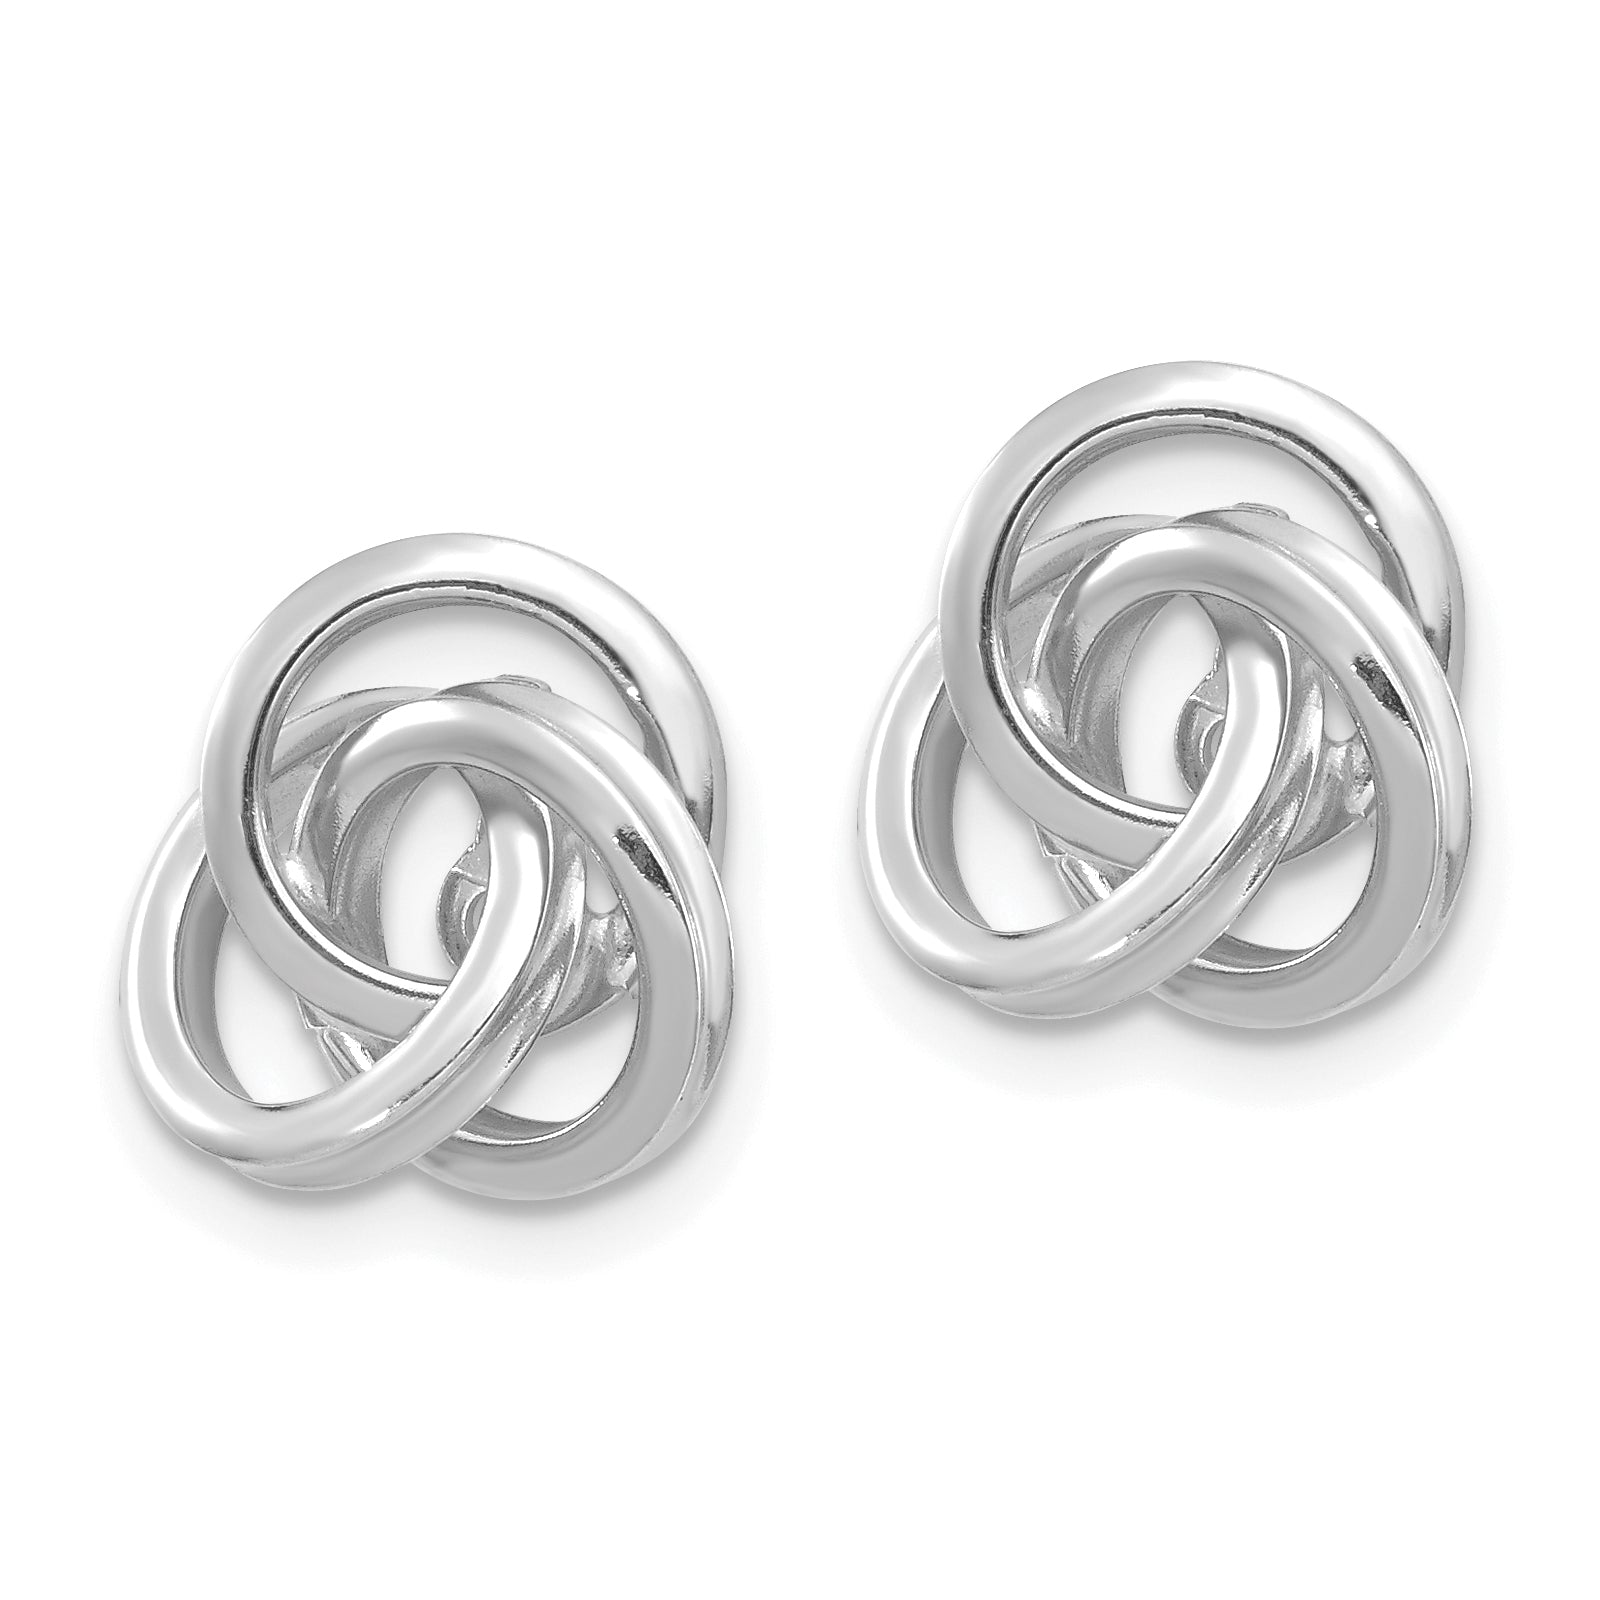 14K White Gold Polished Love Knot Earring Jackets